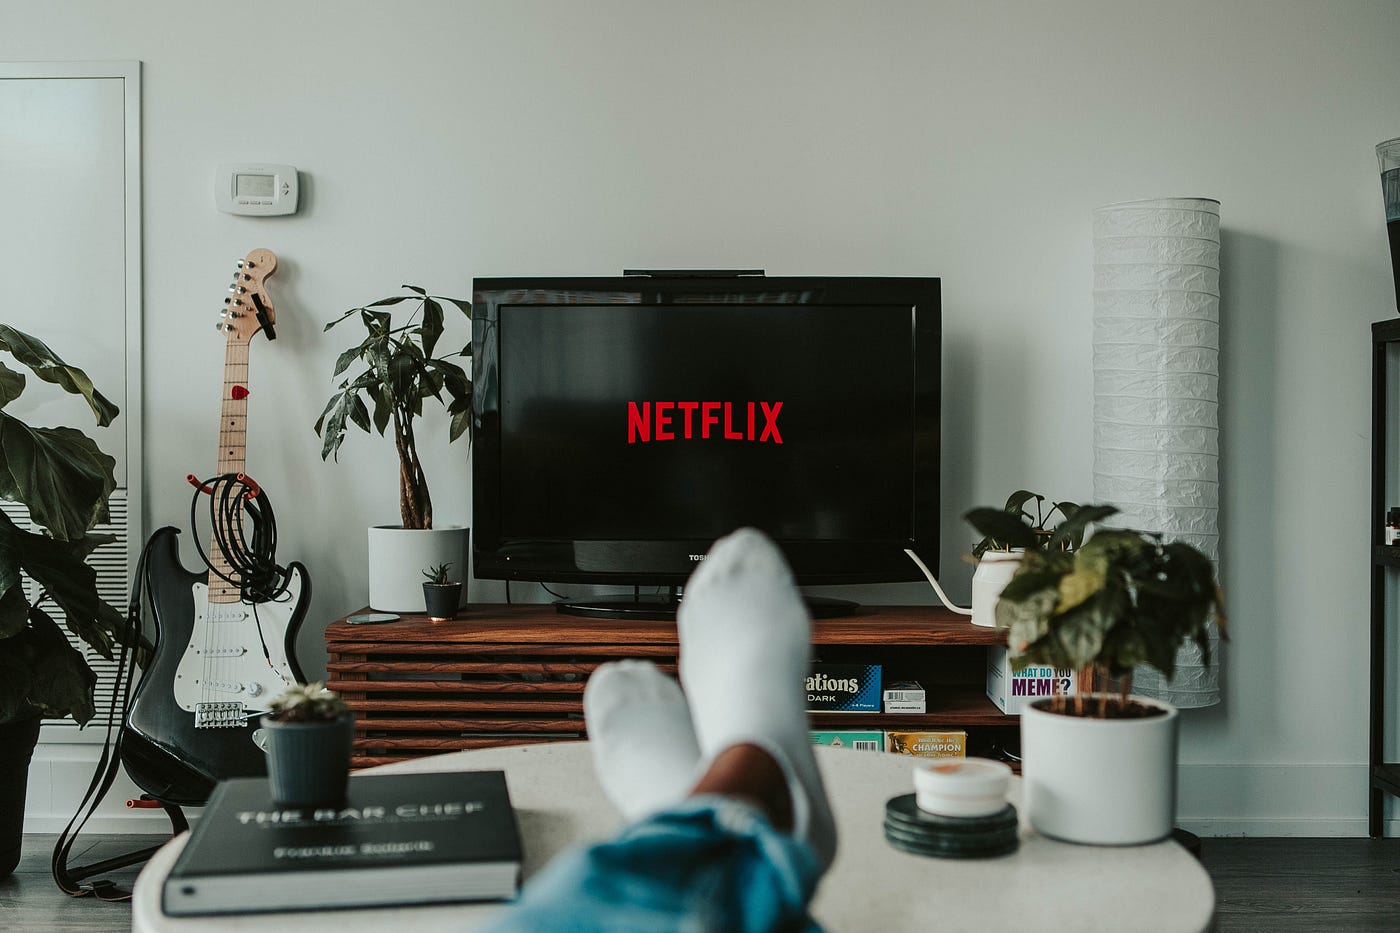 A person sitting with feet on coffee table watching Netflix